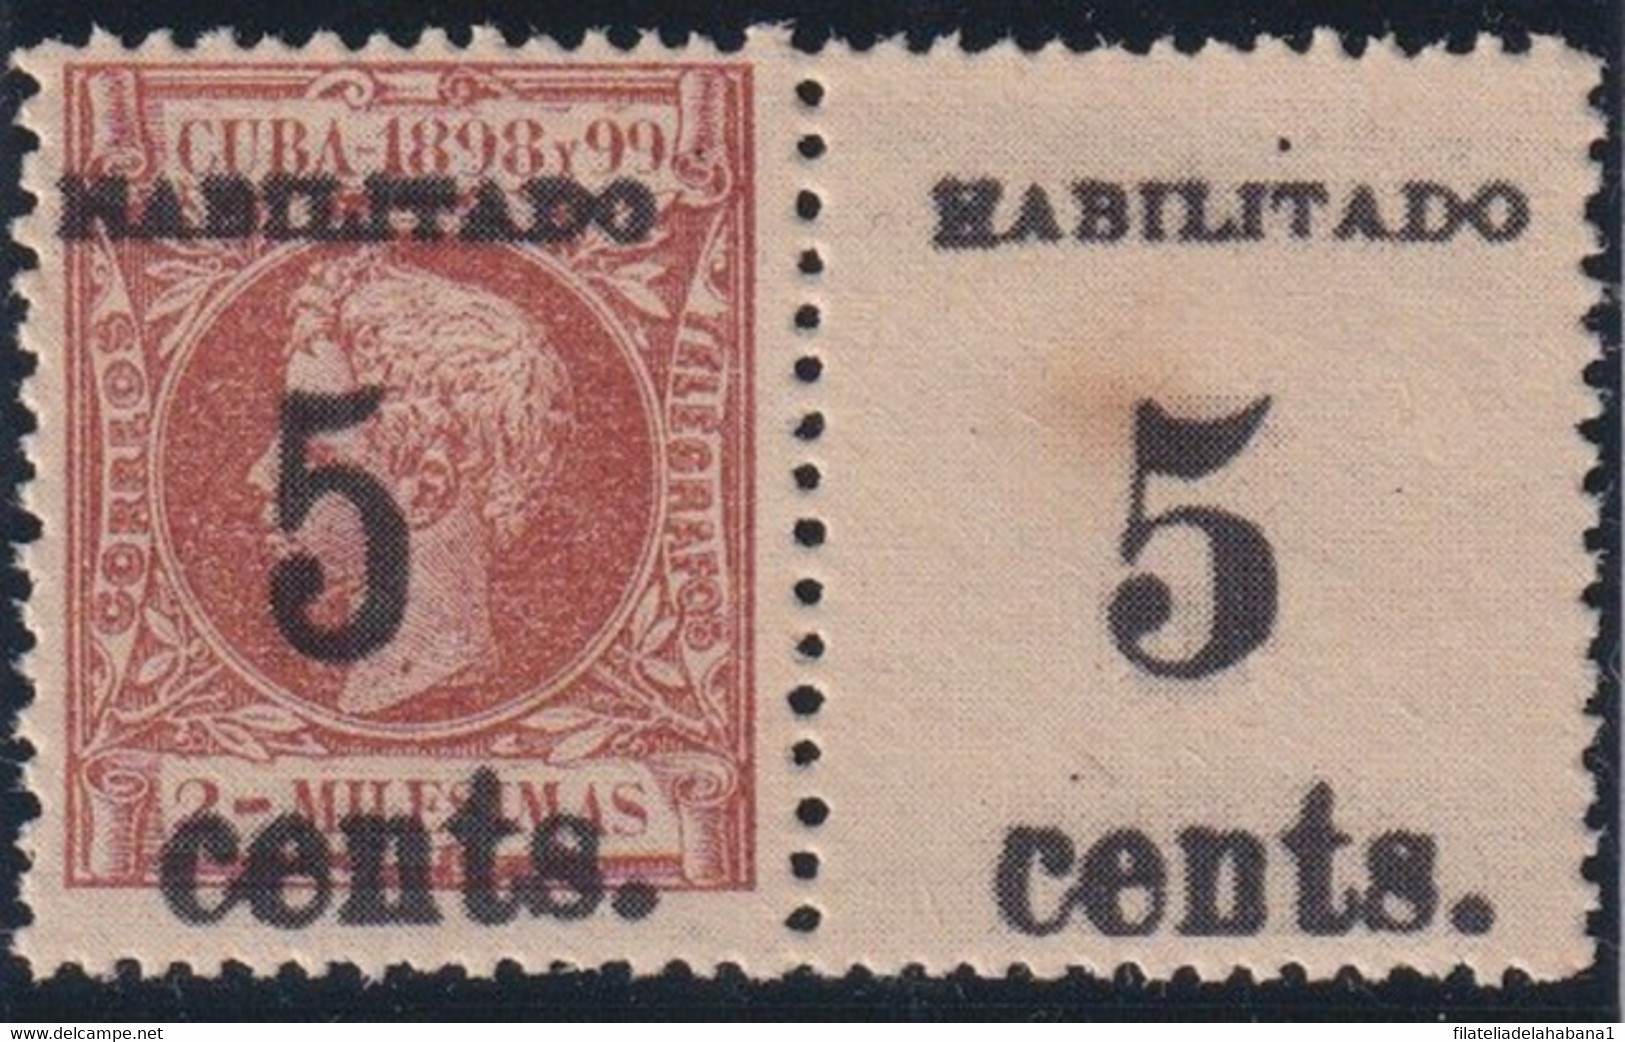 1899-608 CUBA 1899 US OCCUPATION. FORGERY PUERTO PRINCIPE. 2º ISSUE. 5c S. 5 Mls. PAIR NORMAL + SMALL NUMBER. - Ongebruikt